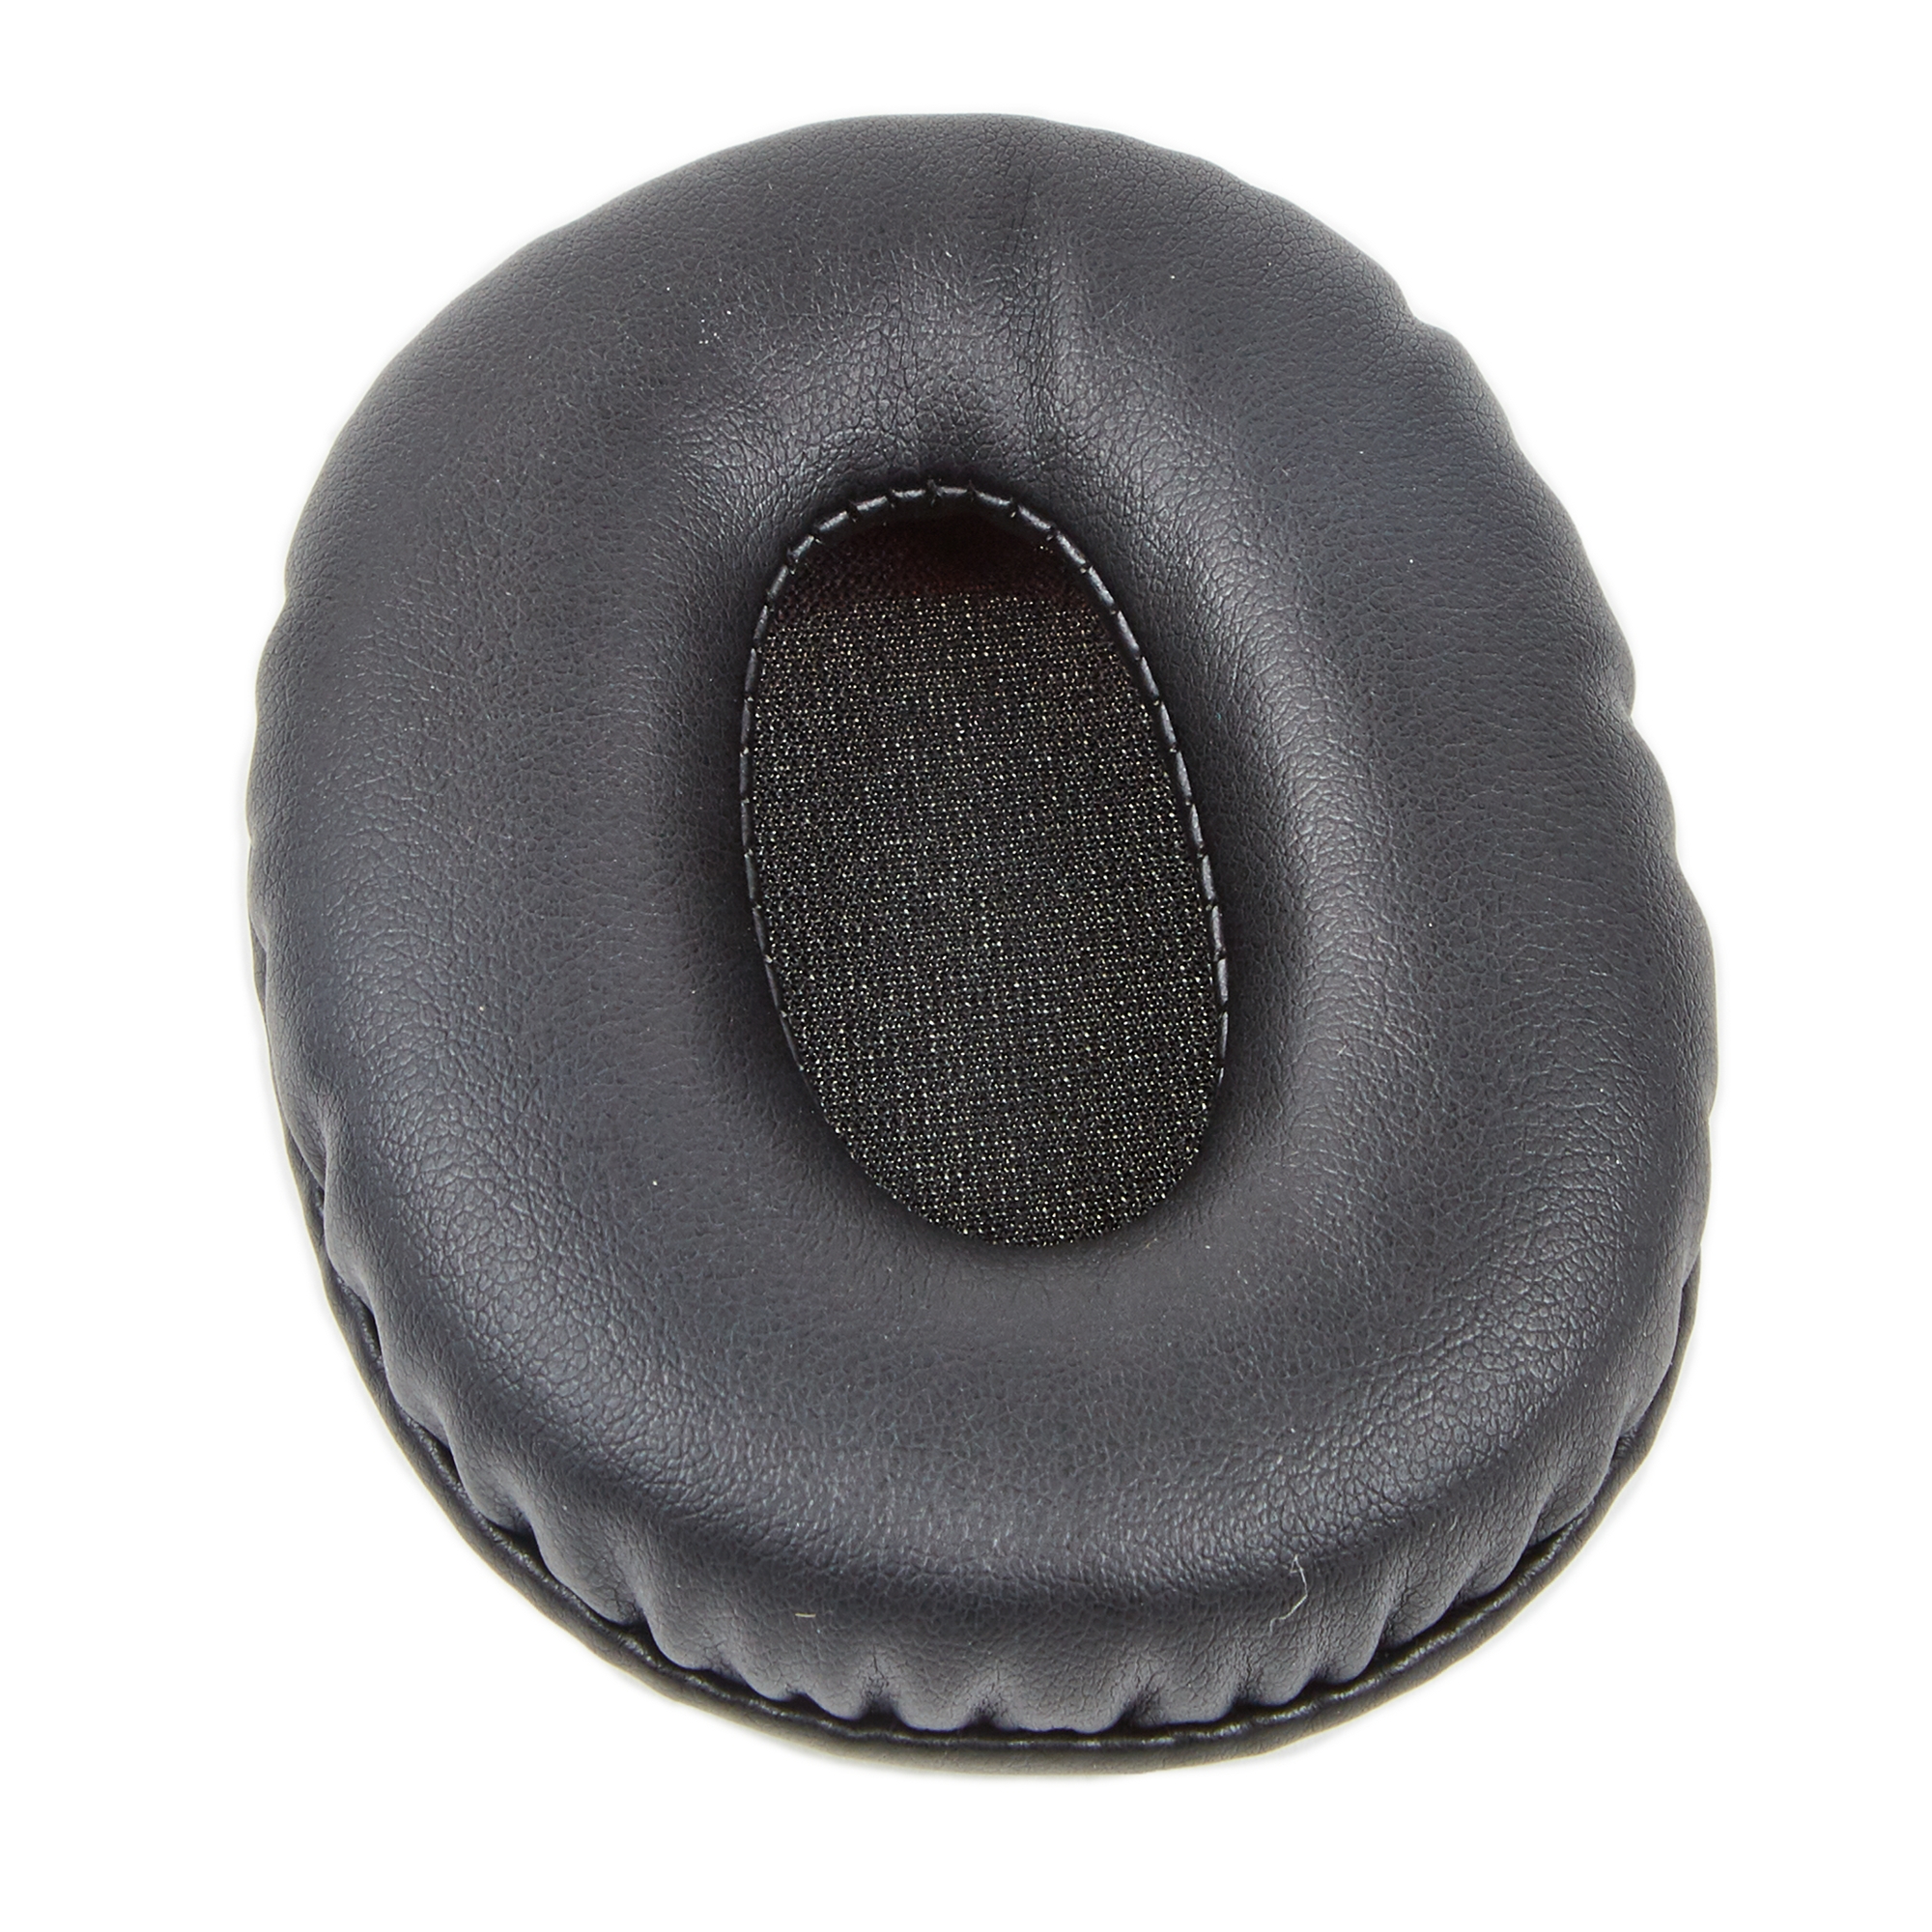 Replacement Ear Pads for Wireless Headphones-30 Pairs